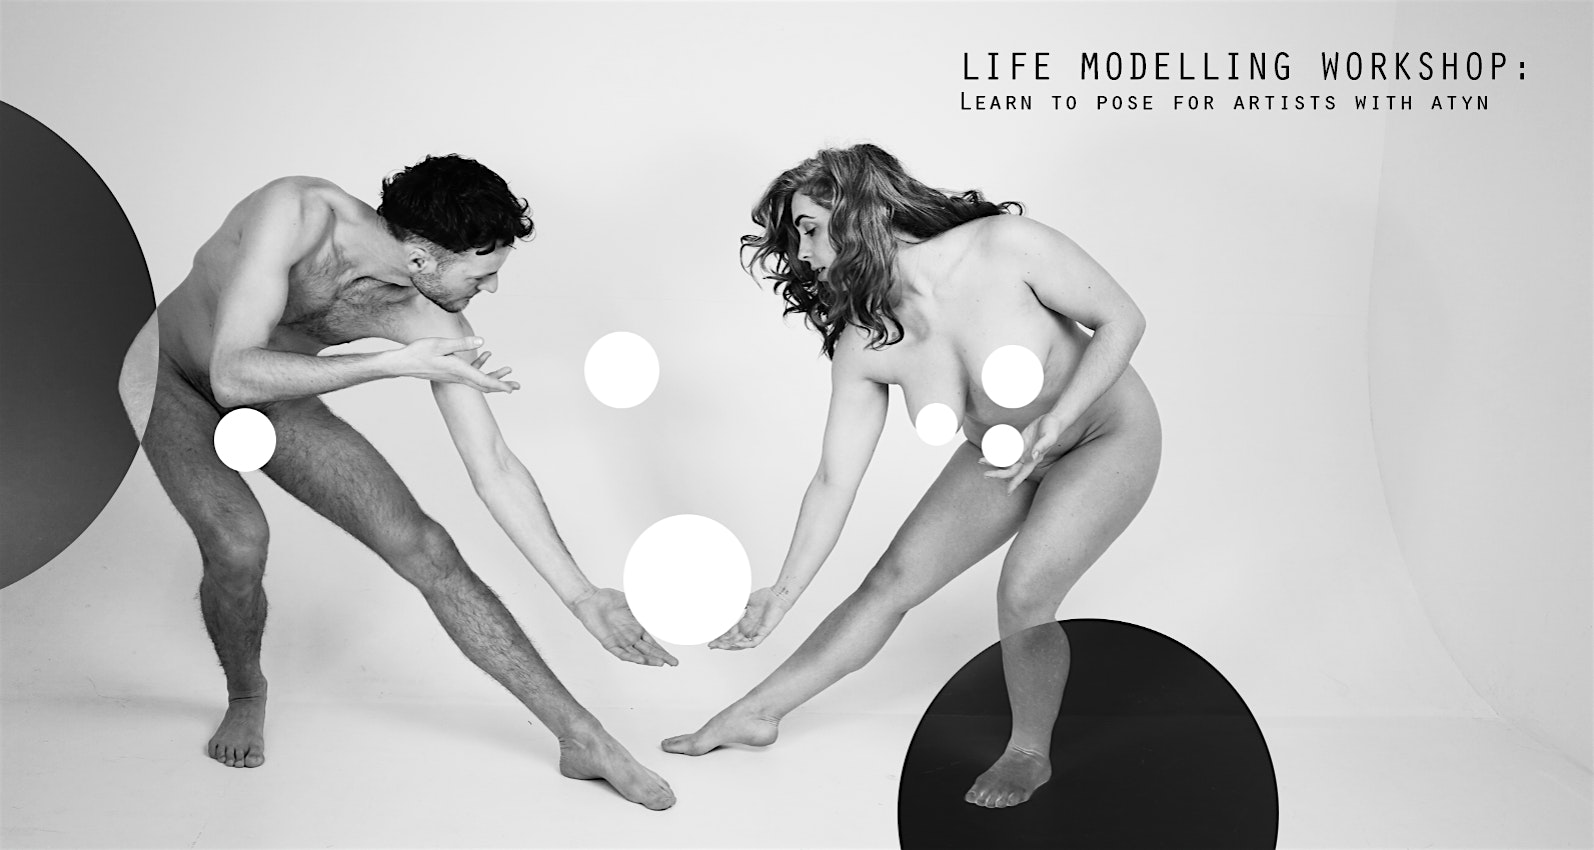 Posing Nude: Life Modelling Workshop | Learn to pose for artists